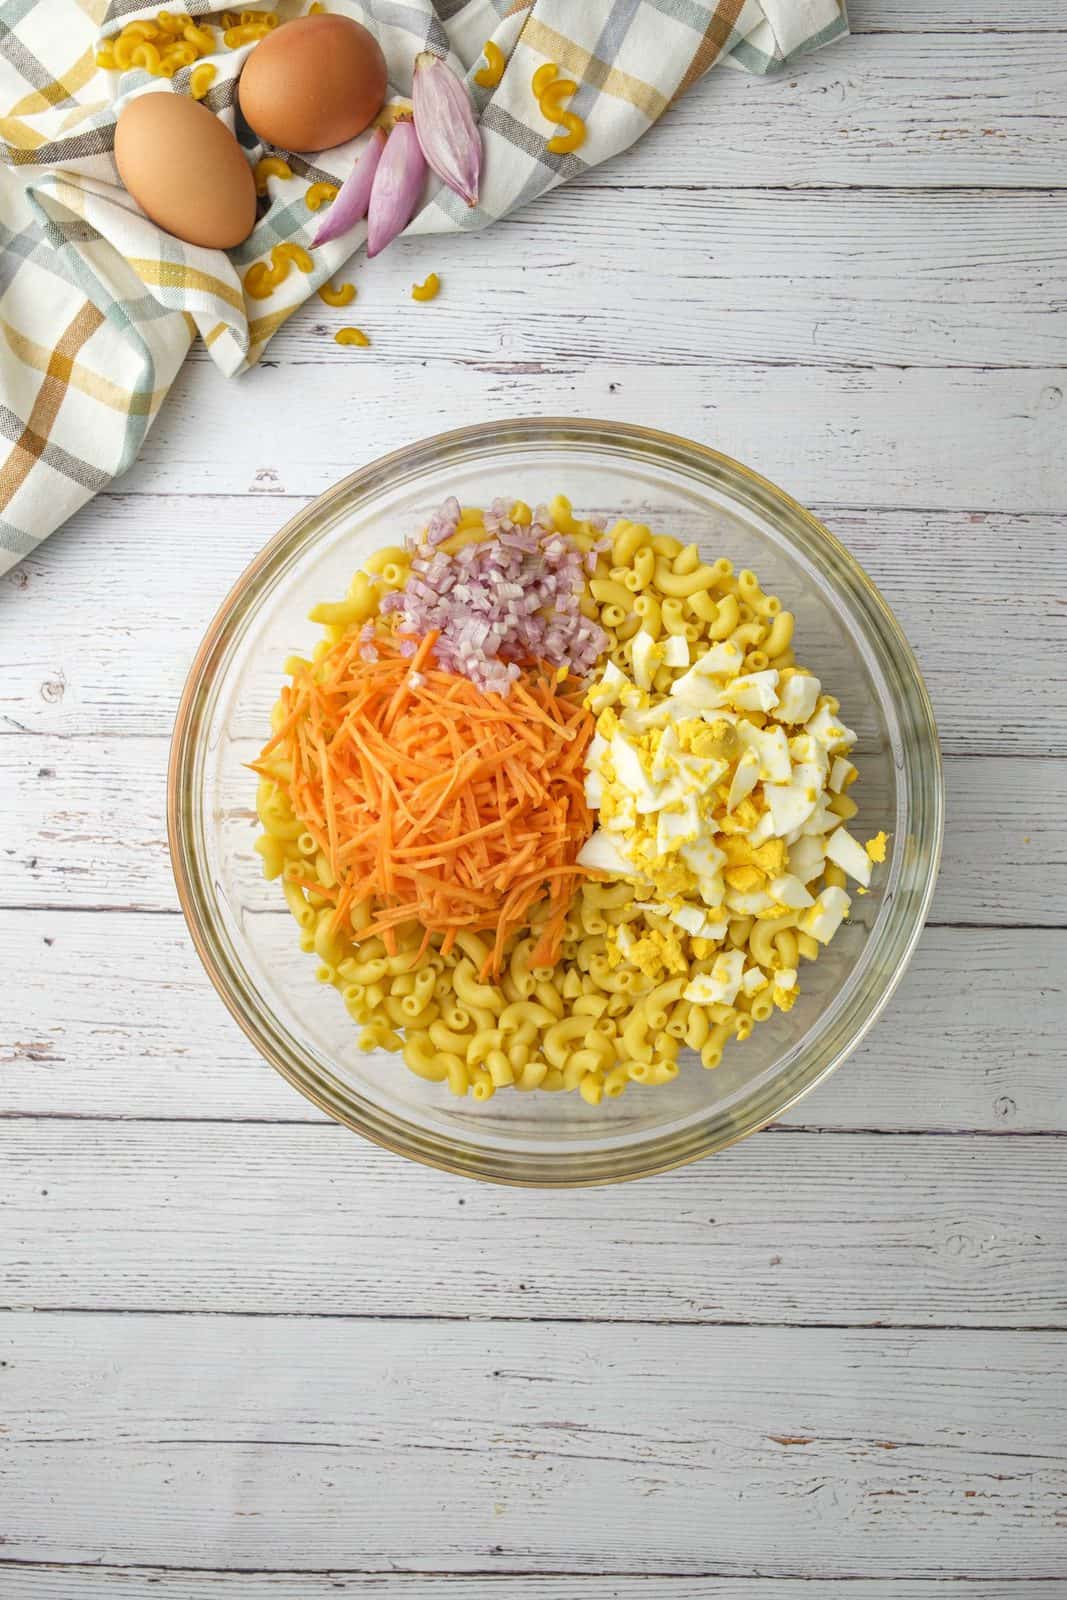 diced boiled eggs, shredded carrots and diced shallots added to bowl with cooked macaroni.